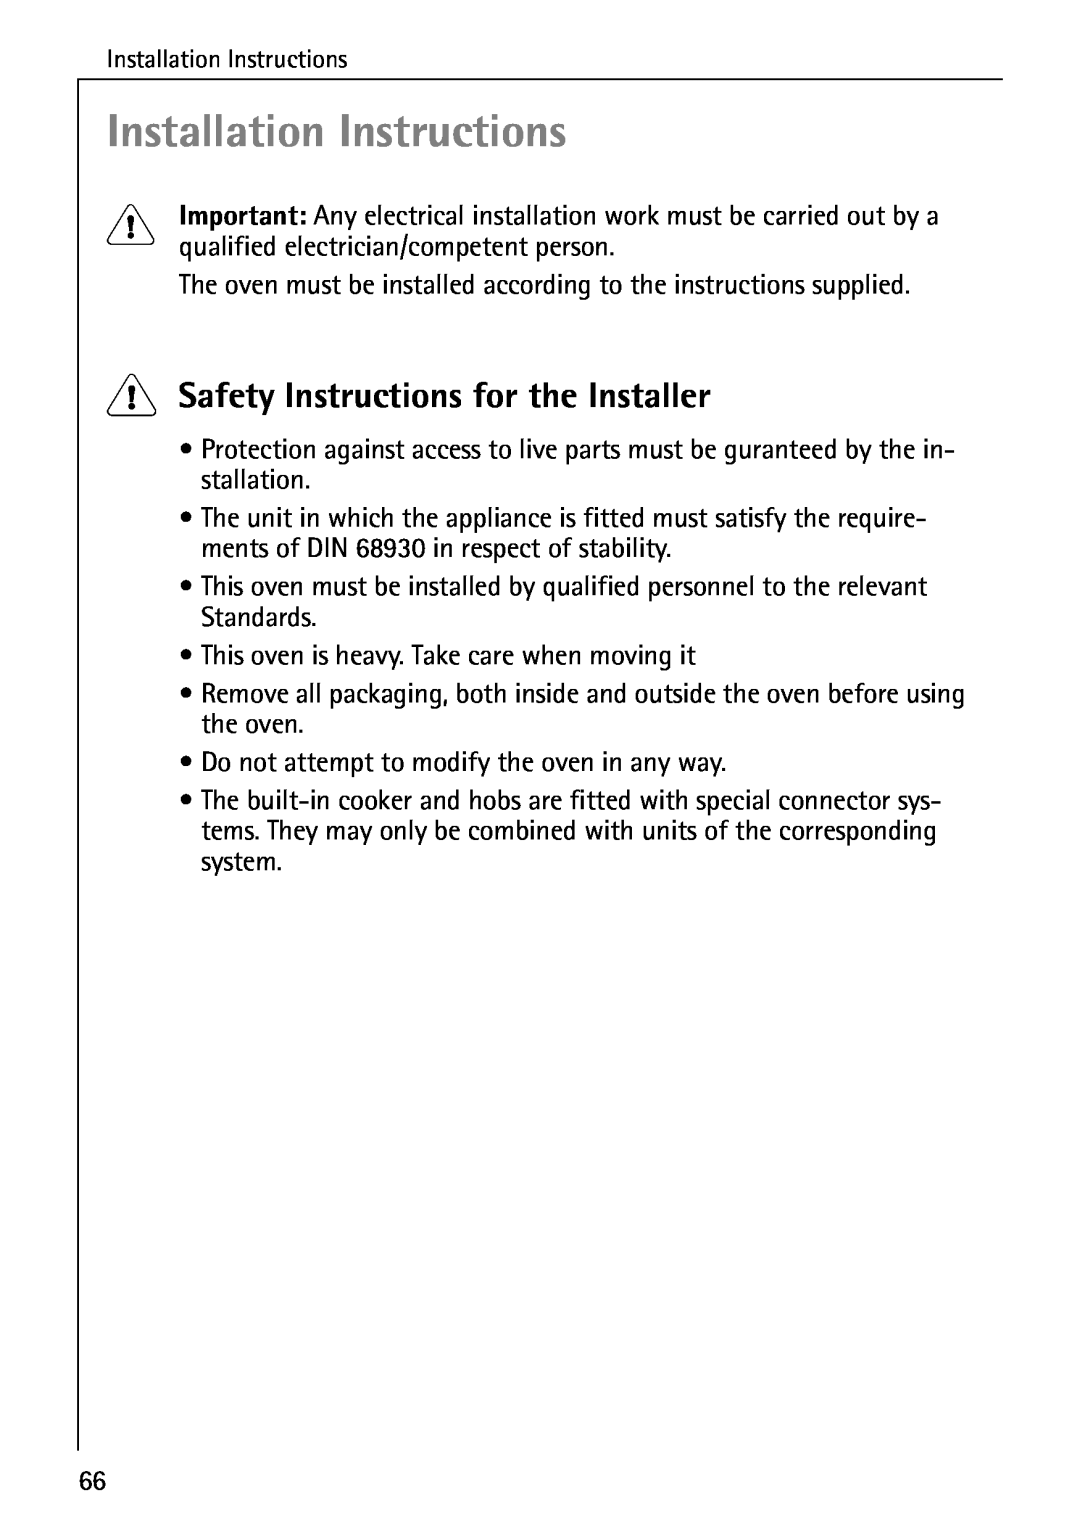 Electrolux B6140-1 manual Installation Instructions, Safety Instructions for the Installer 